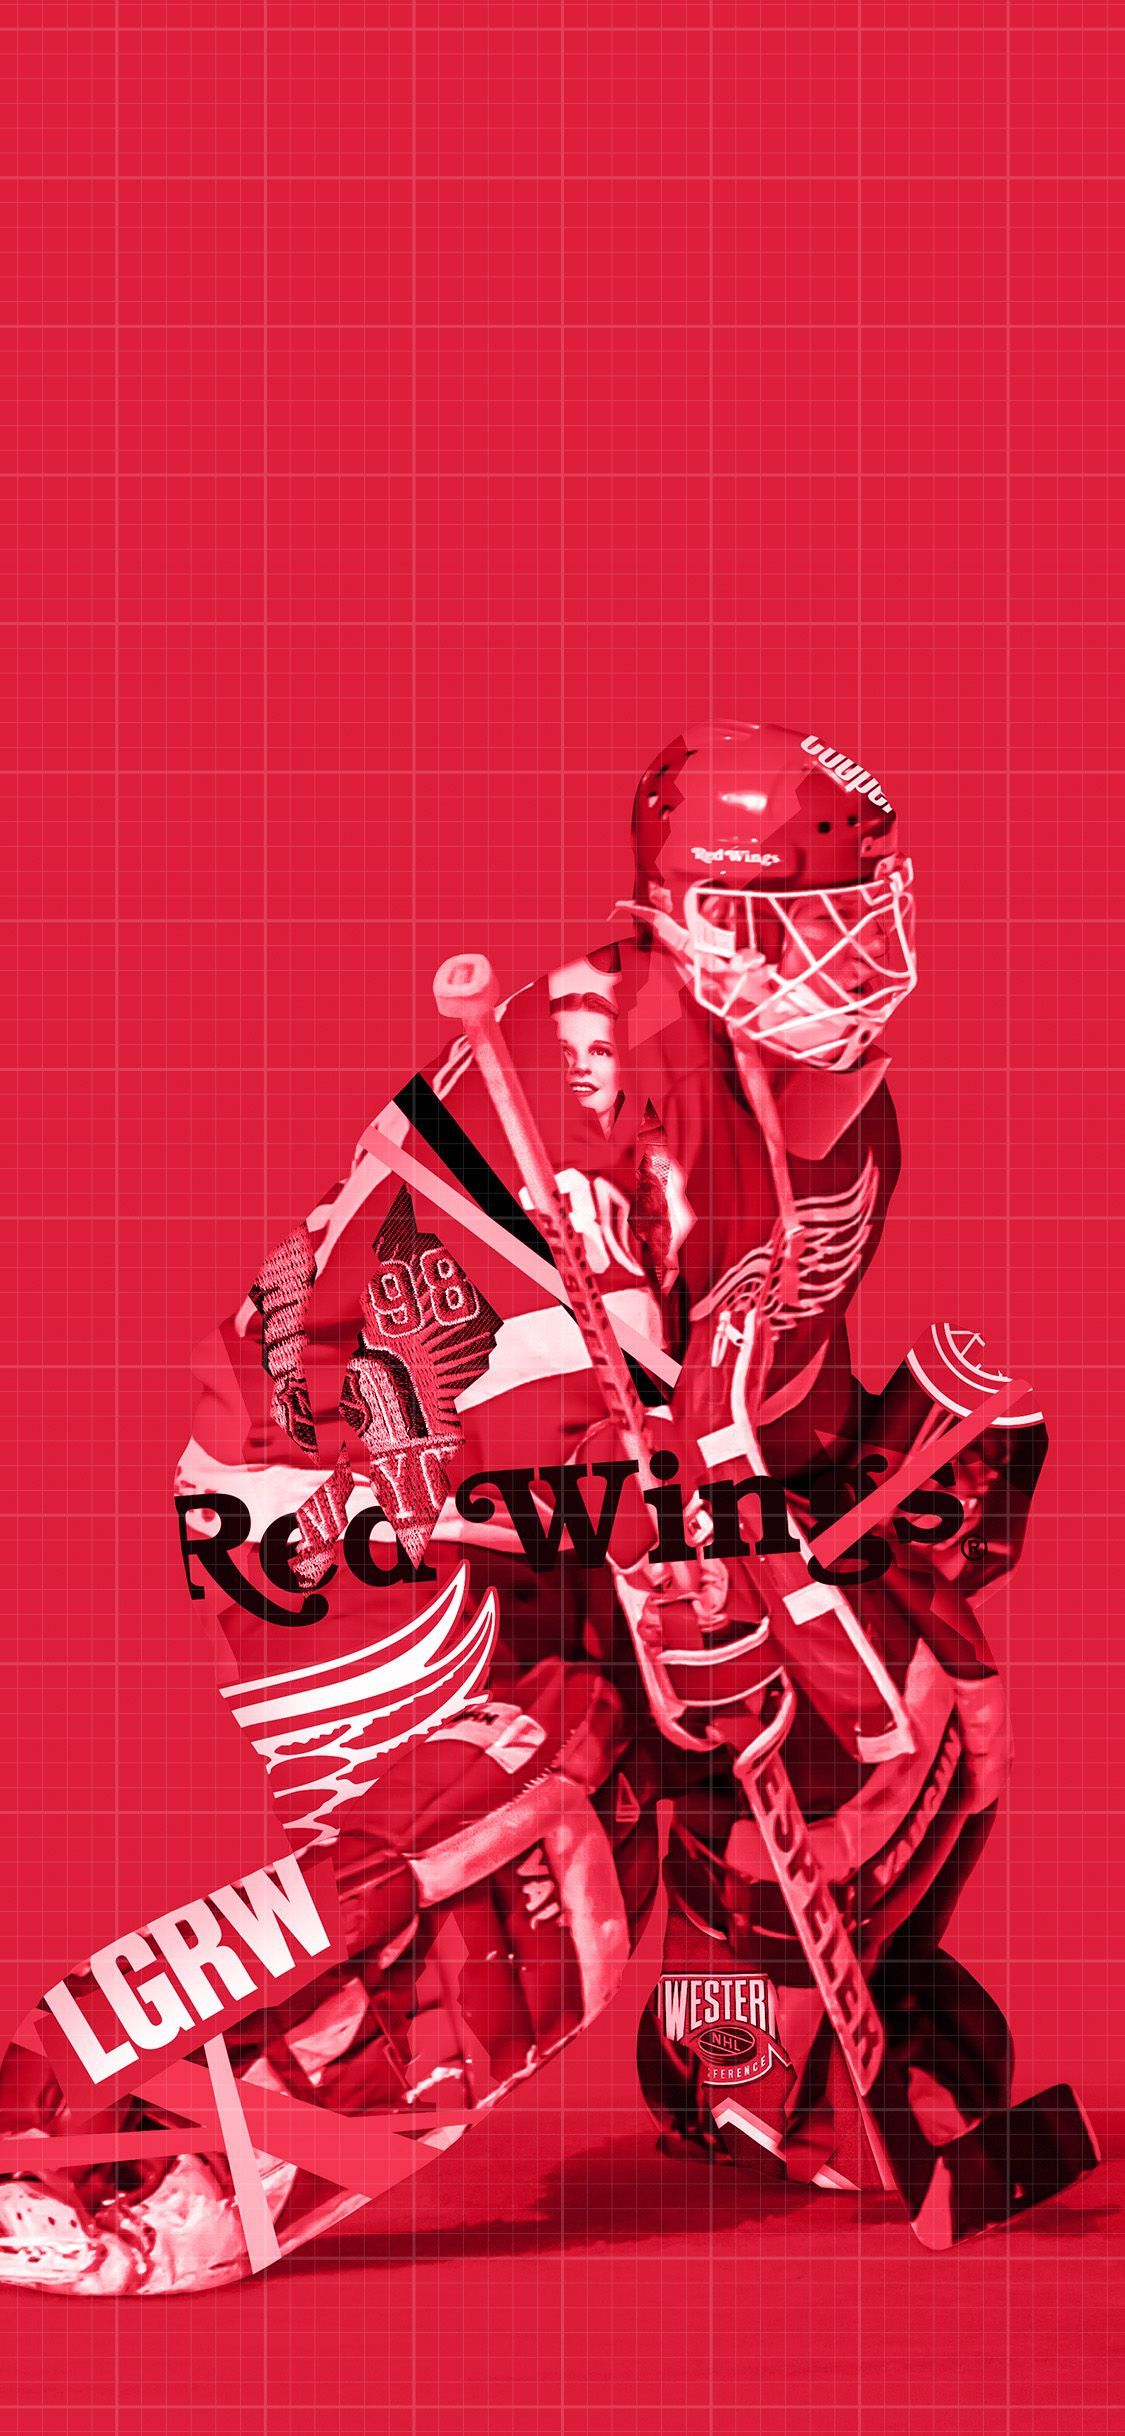 A collage of a goalie with his equipment. - Wings